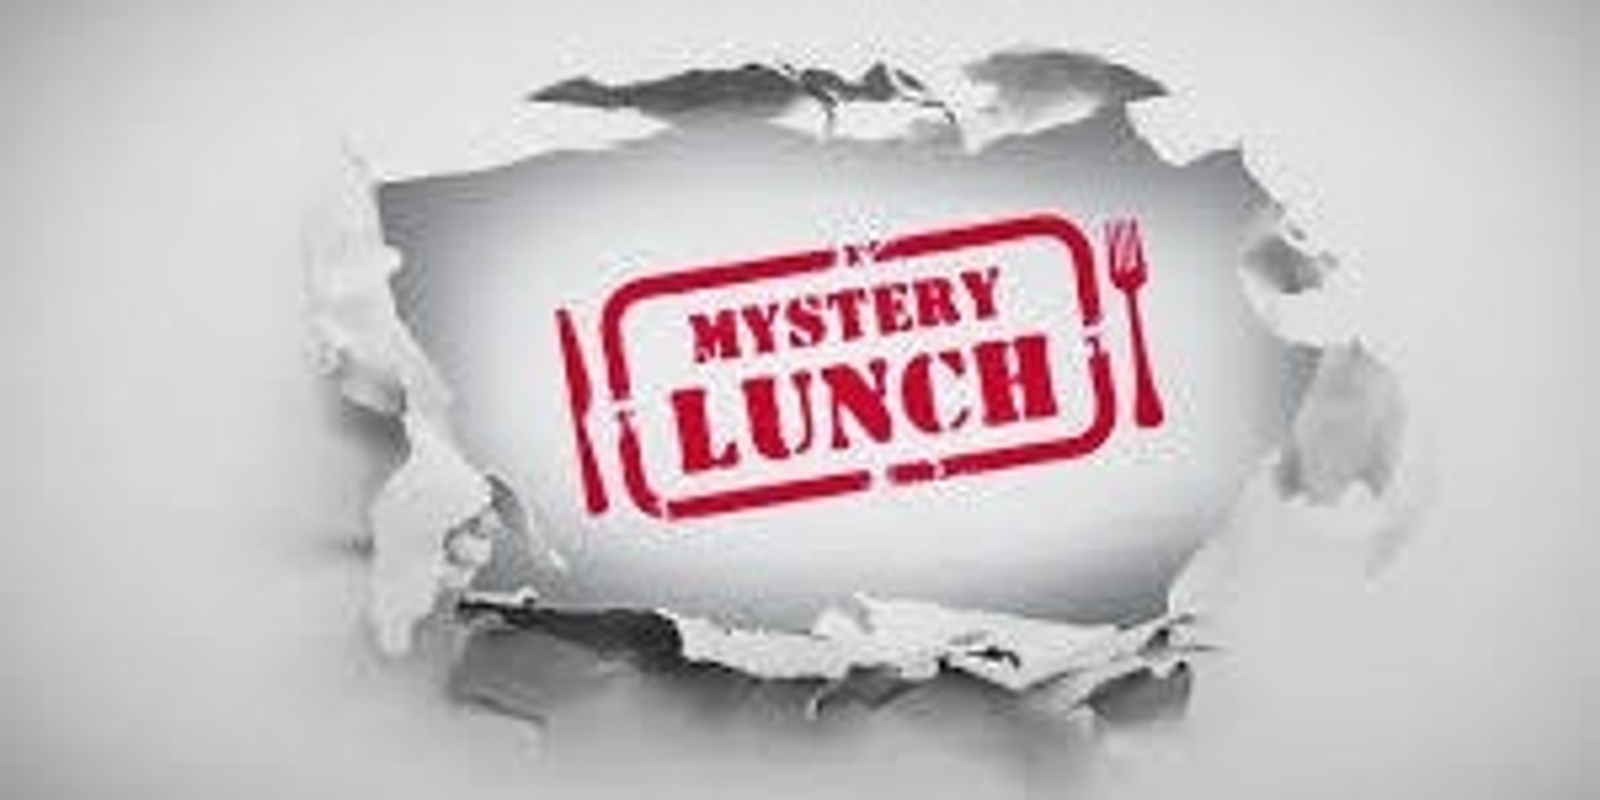 Banner image for Sunday Mystery Lunch